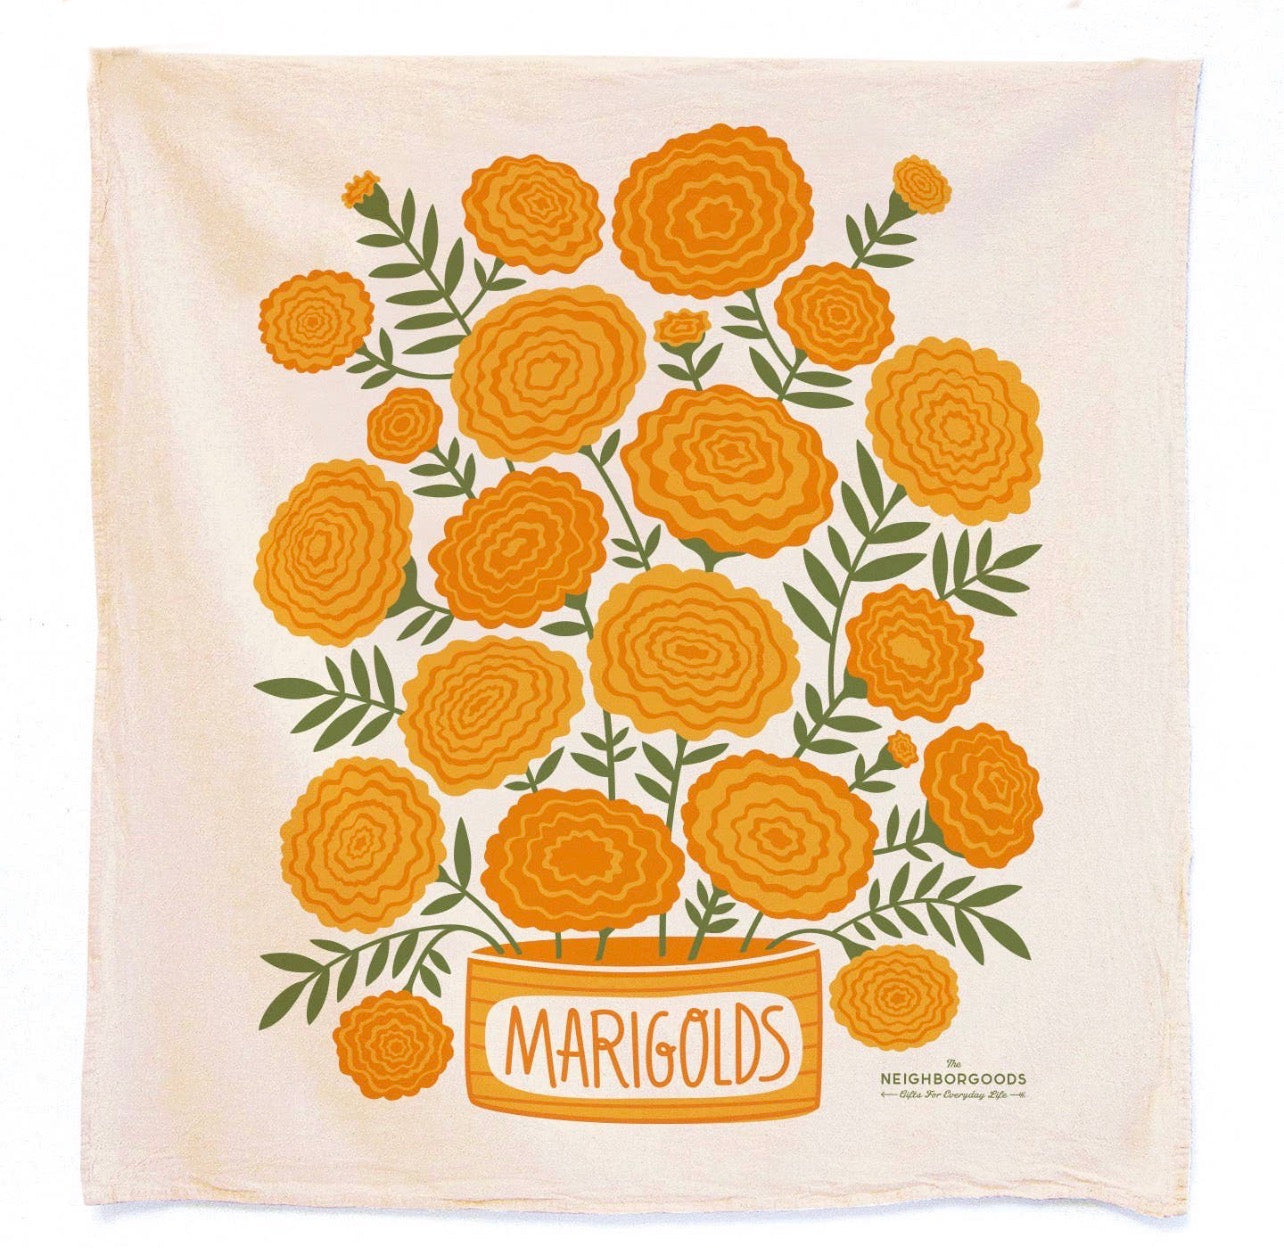 Natural kitchen towel with a bundle of yellow and orange marigolds with a container that has the phrase MARIGOLDS in orange lettering.